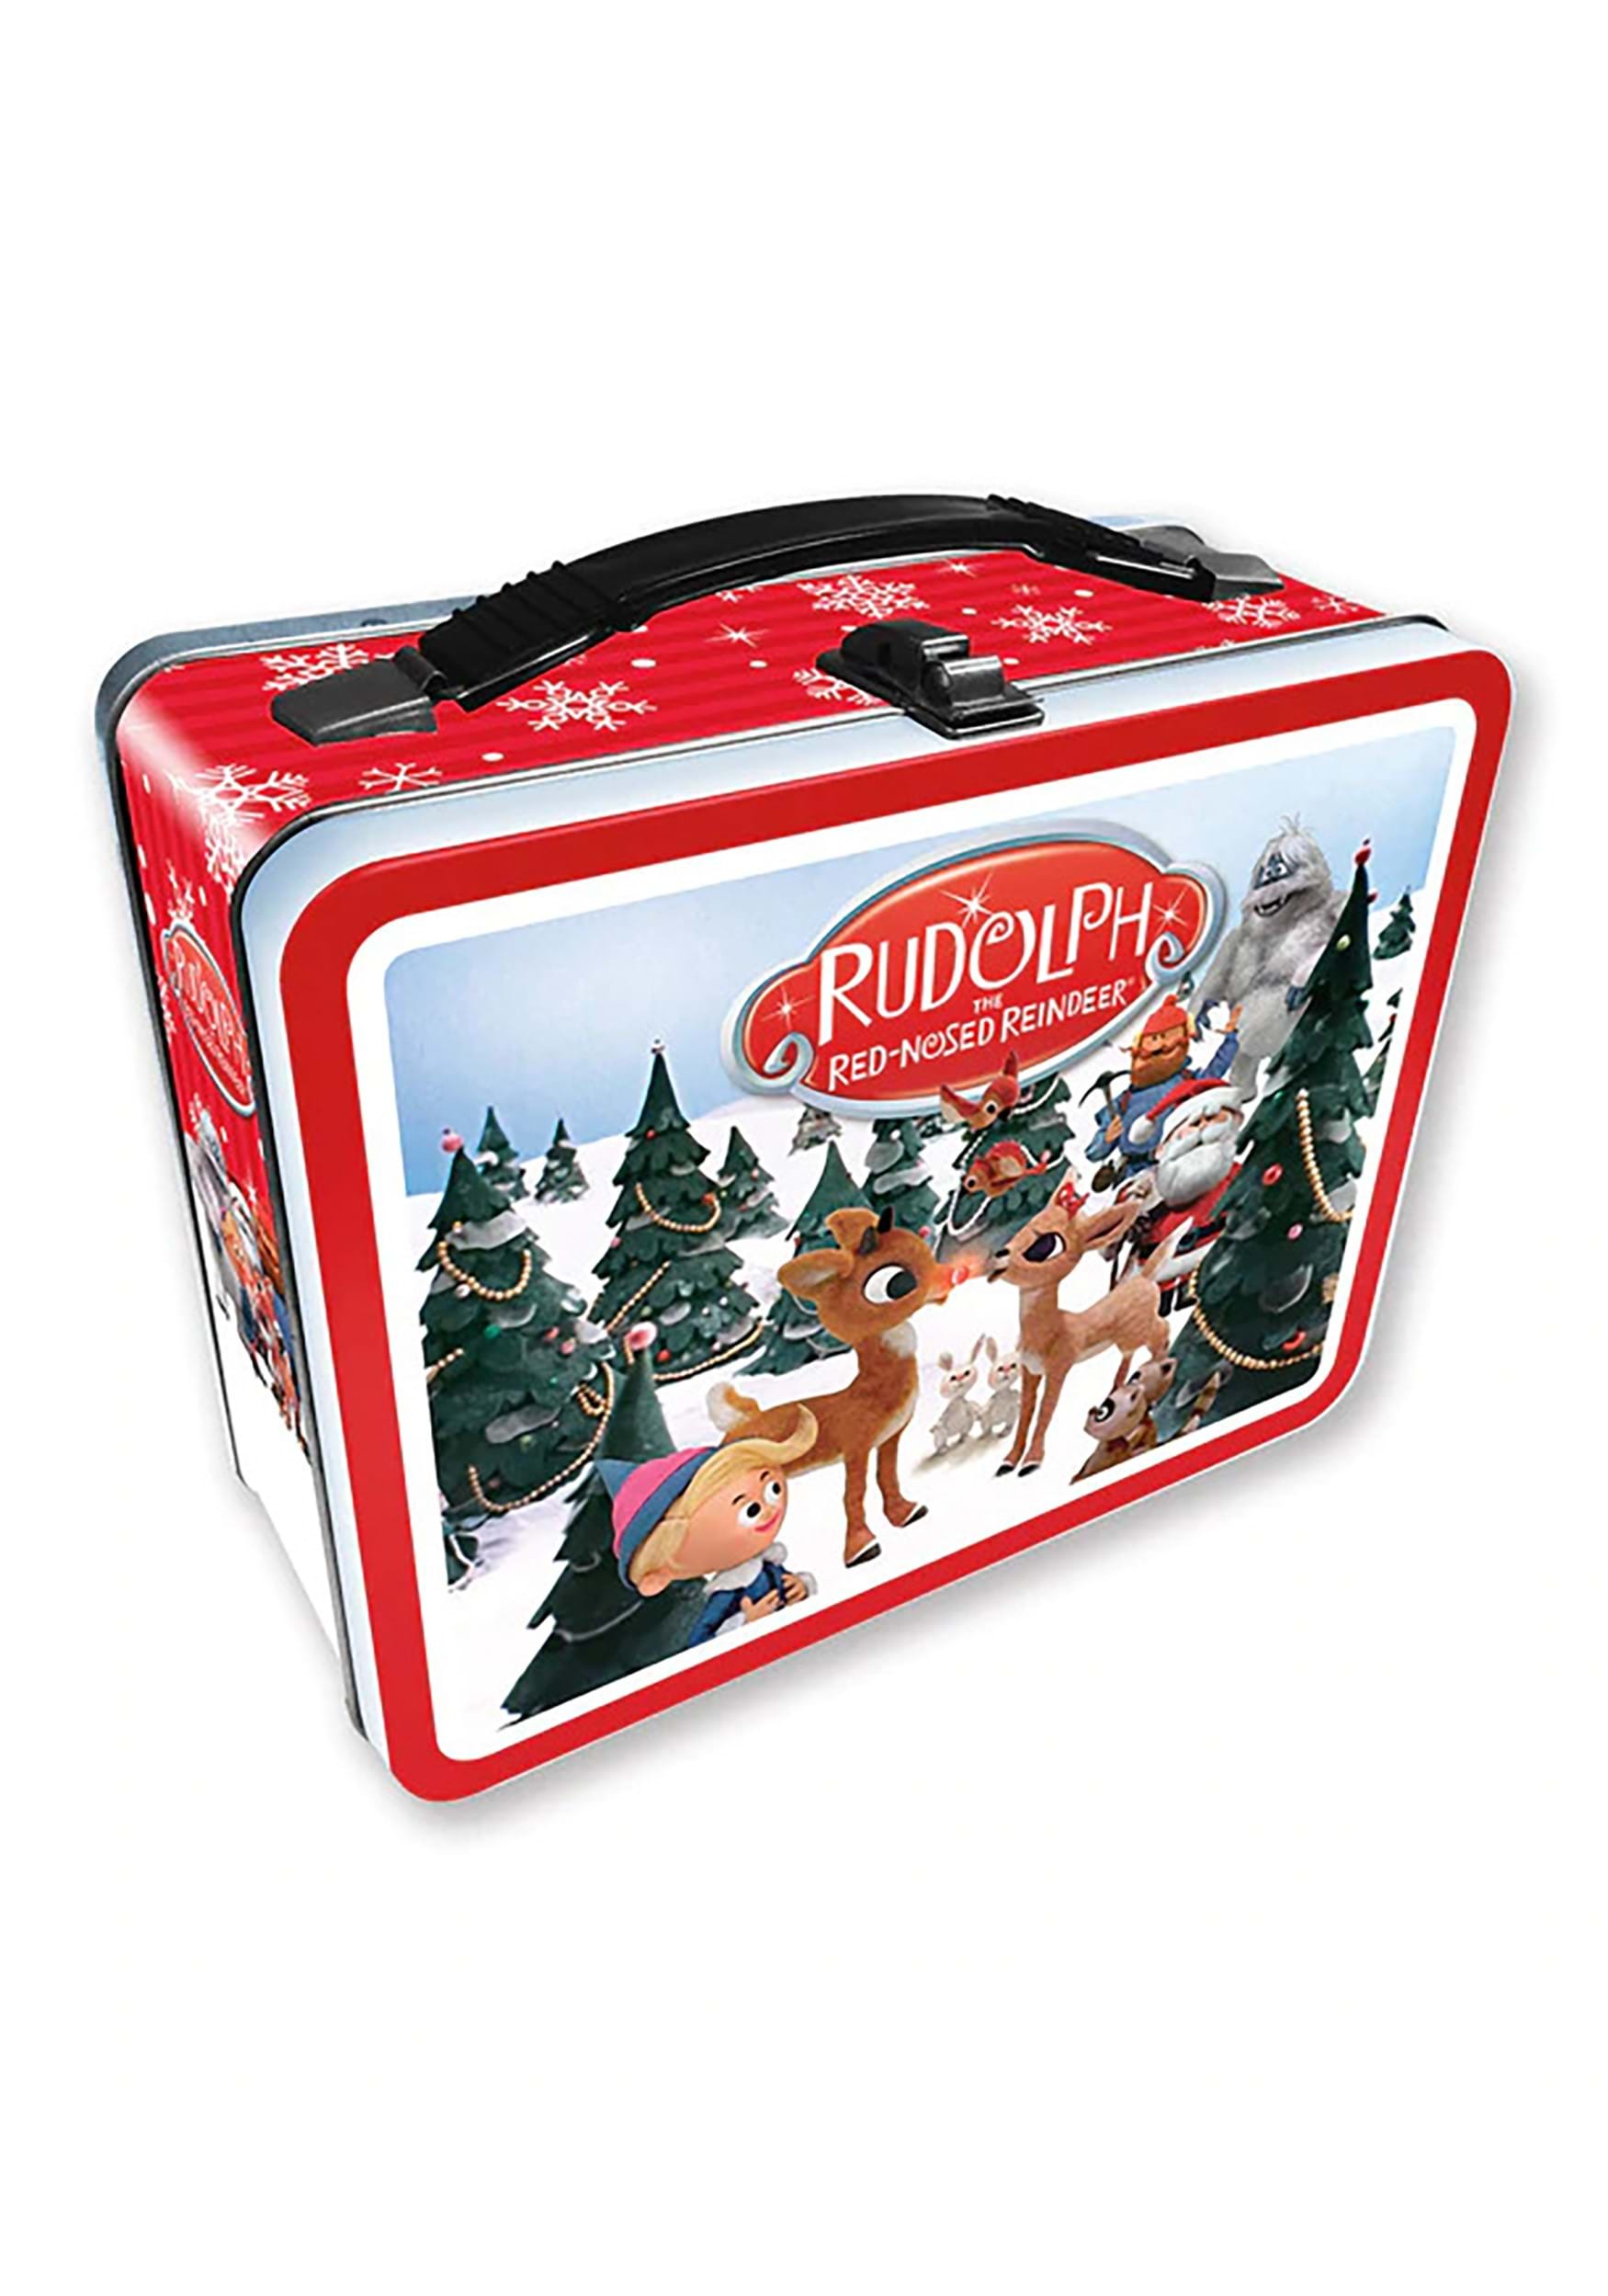 https://images.fun.com/products/83701/1-1/rudolph-metal-lunch-box.jpg